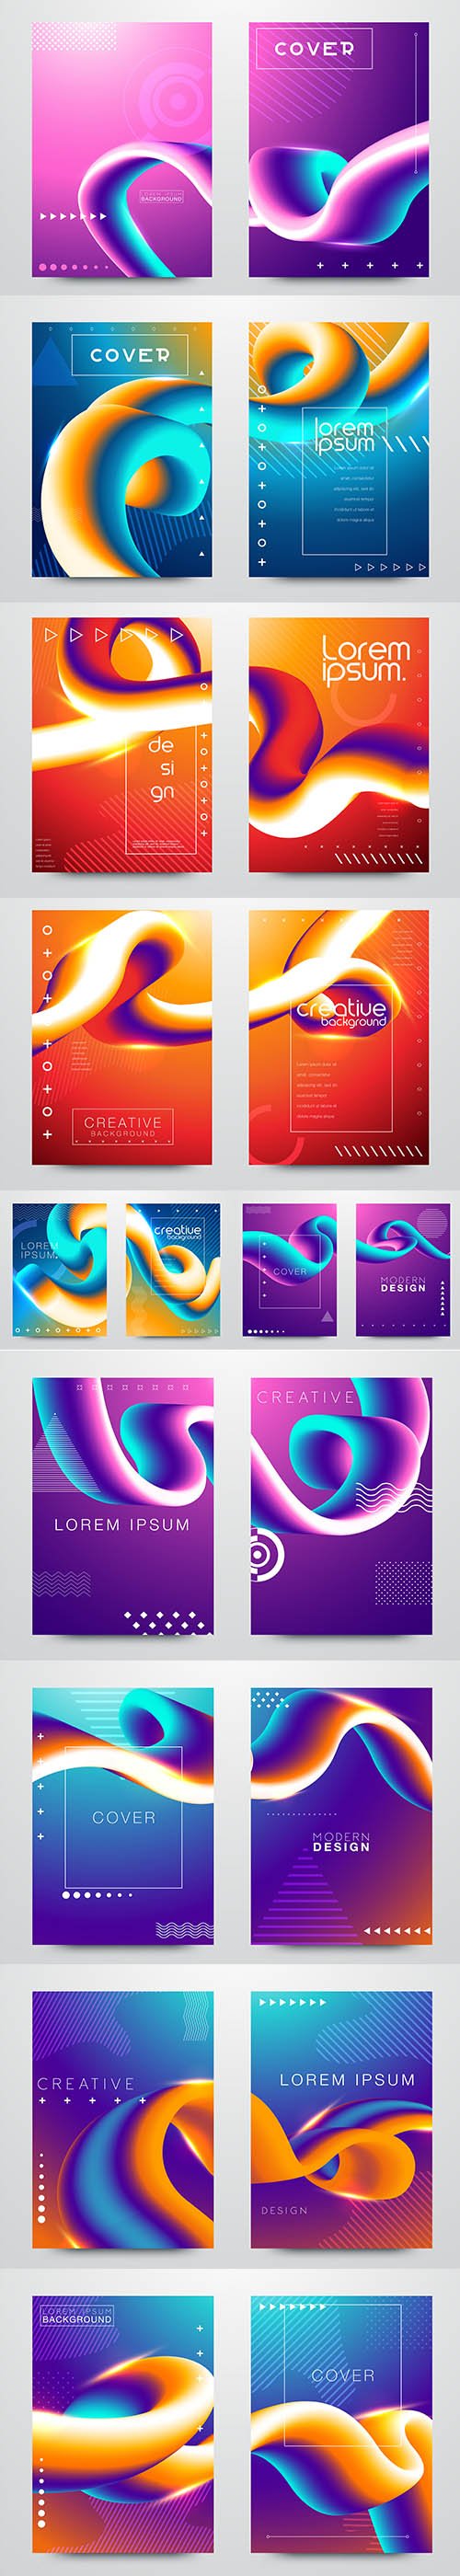 Modern Abstract Covers Set